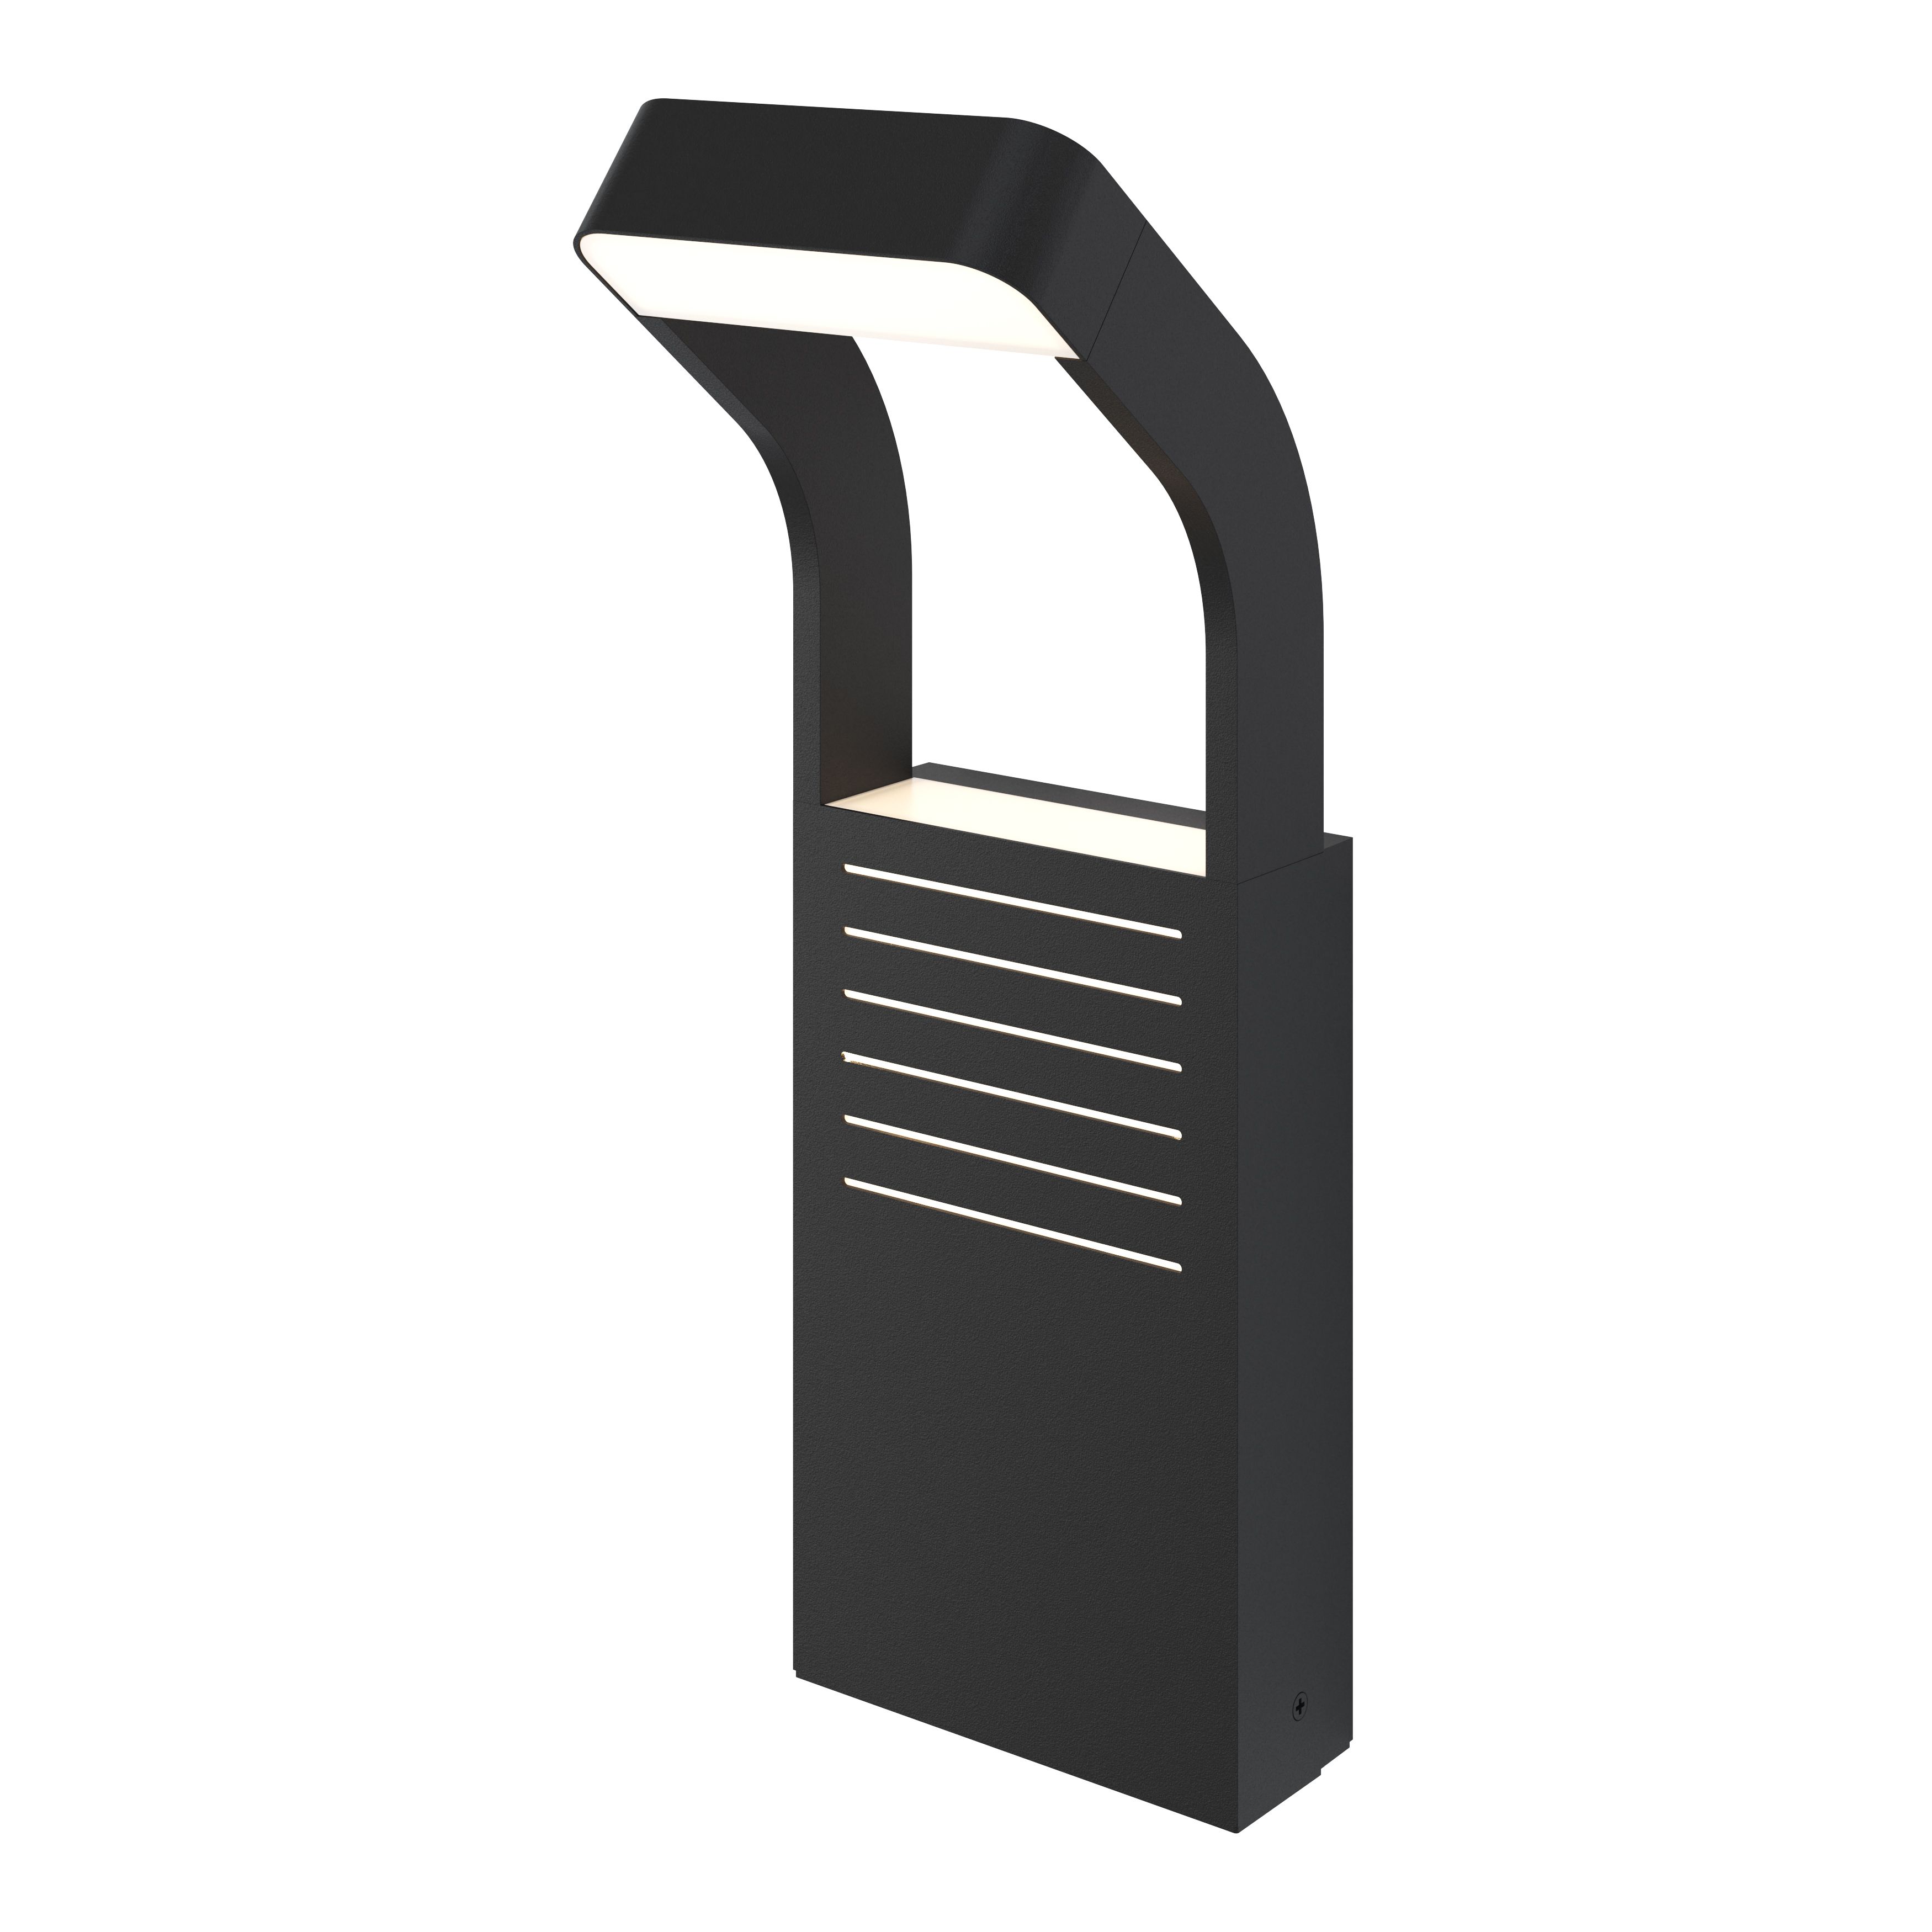 GoodHome Majorca Black Mains-powered 1 lamp Integrated LED Outdoor Post light (H)450mm